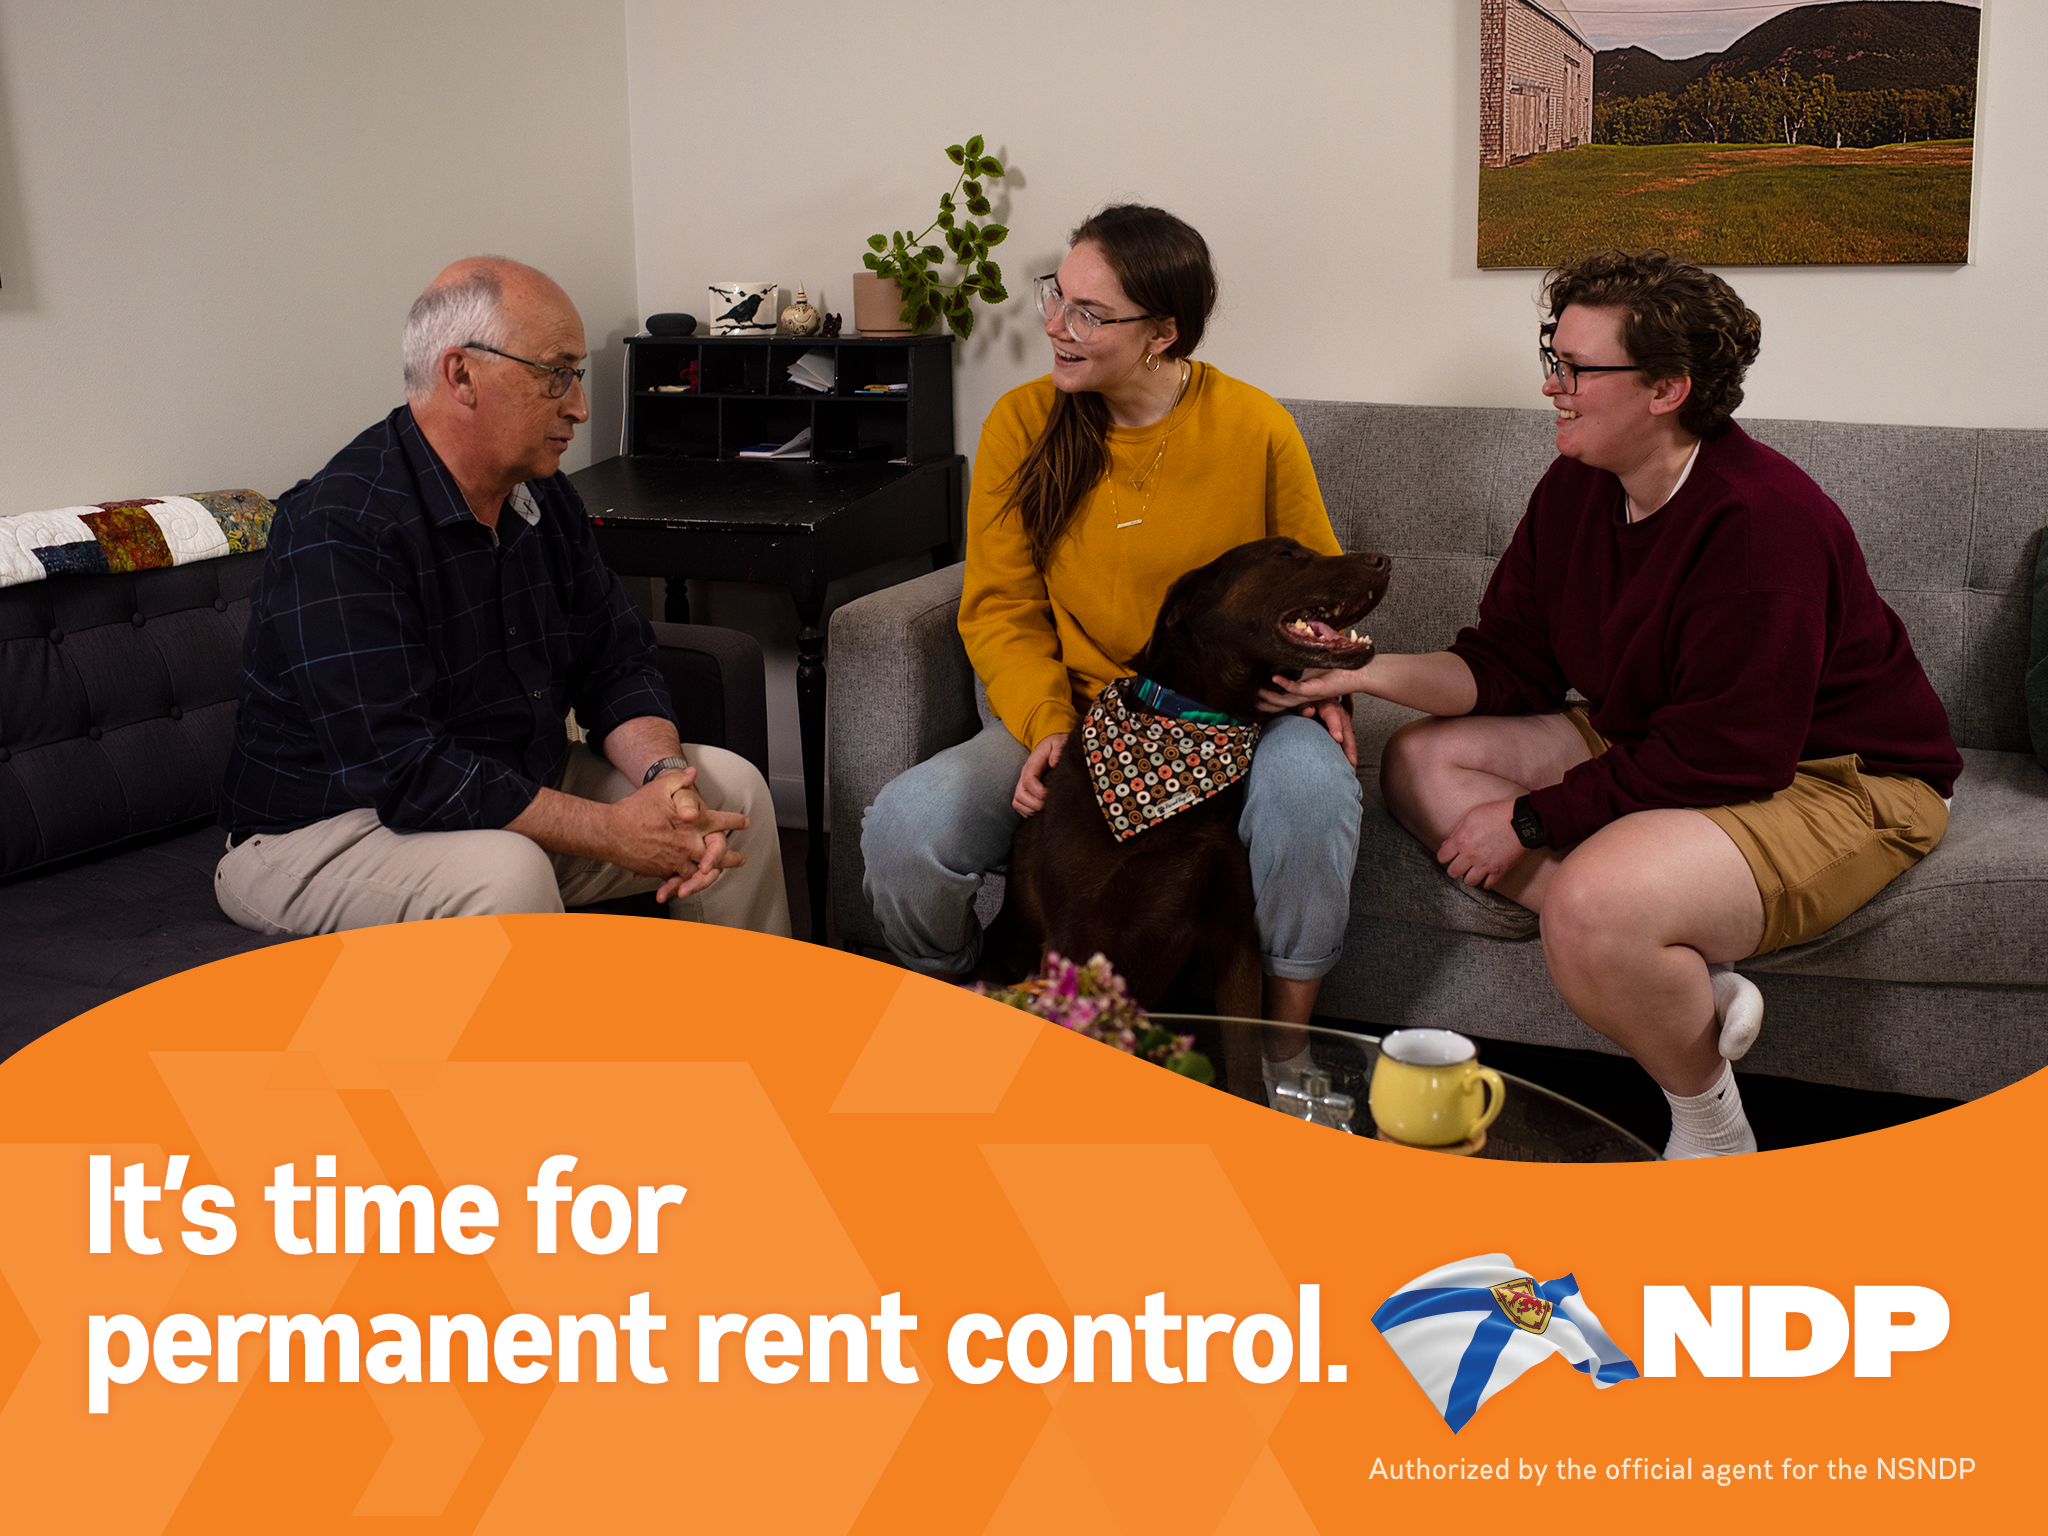 NDP committed to permanent rent control to ensure people can stay in